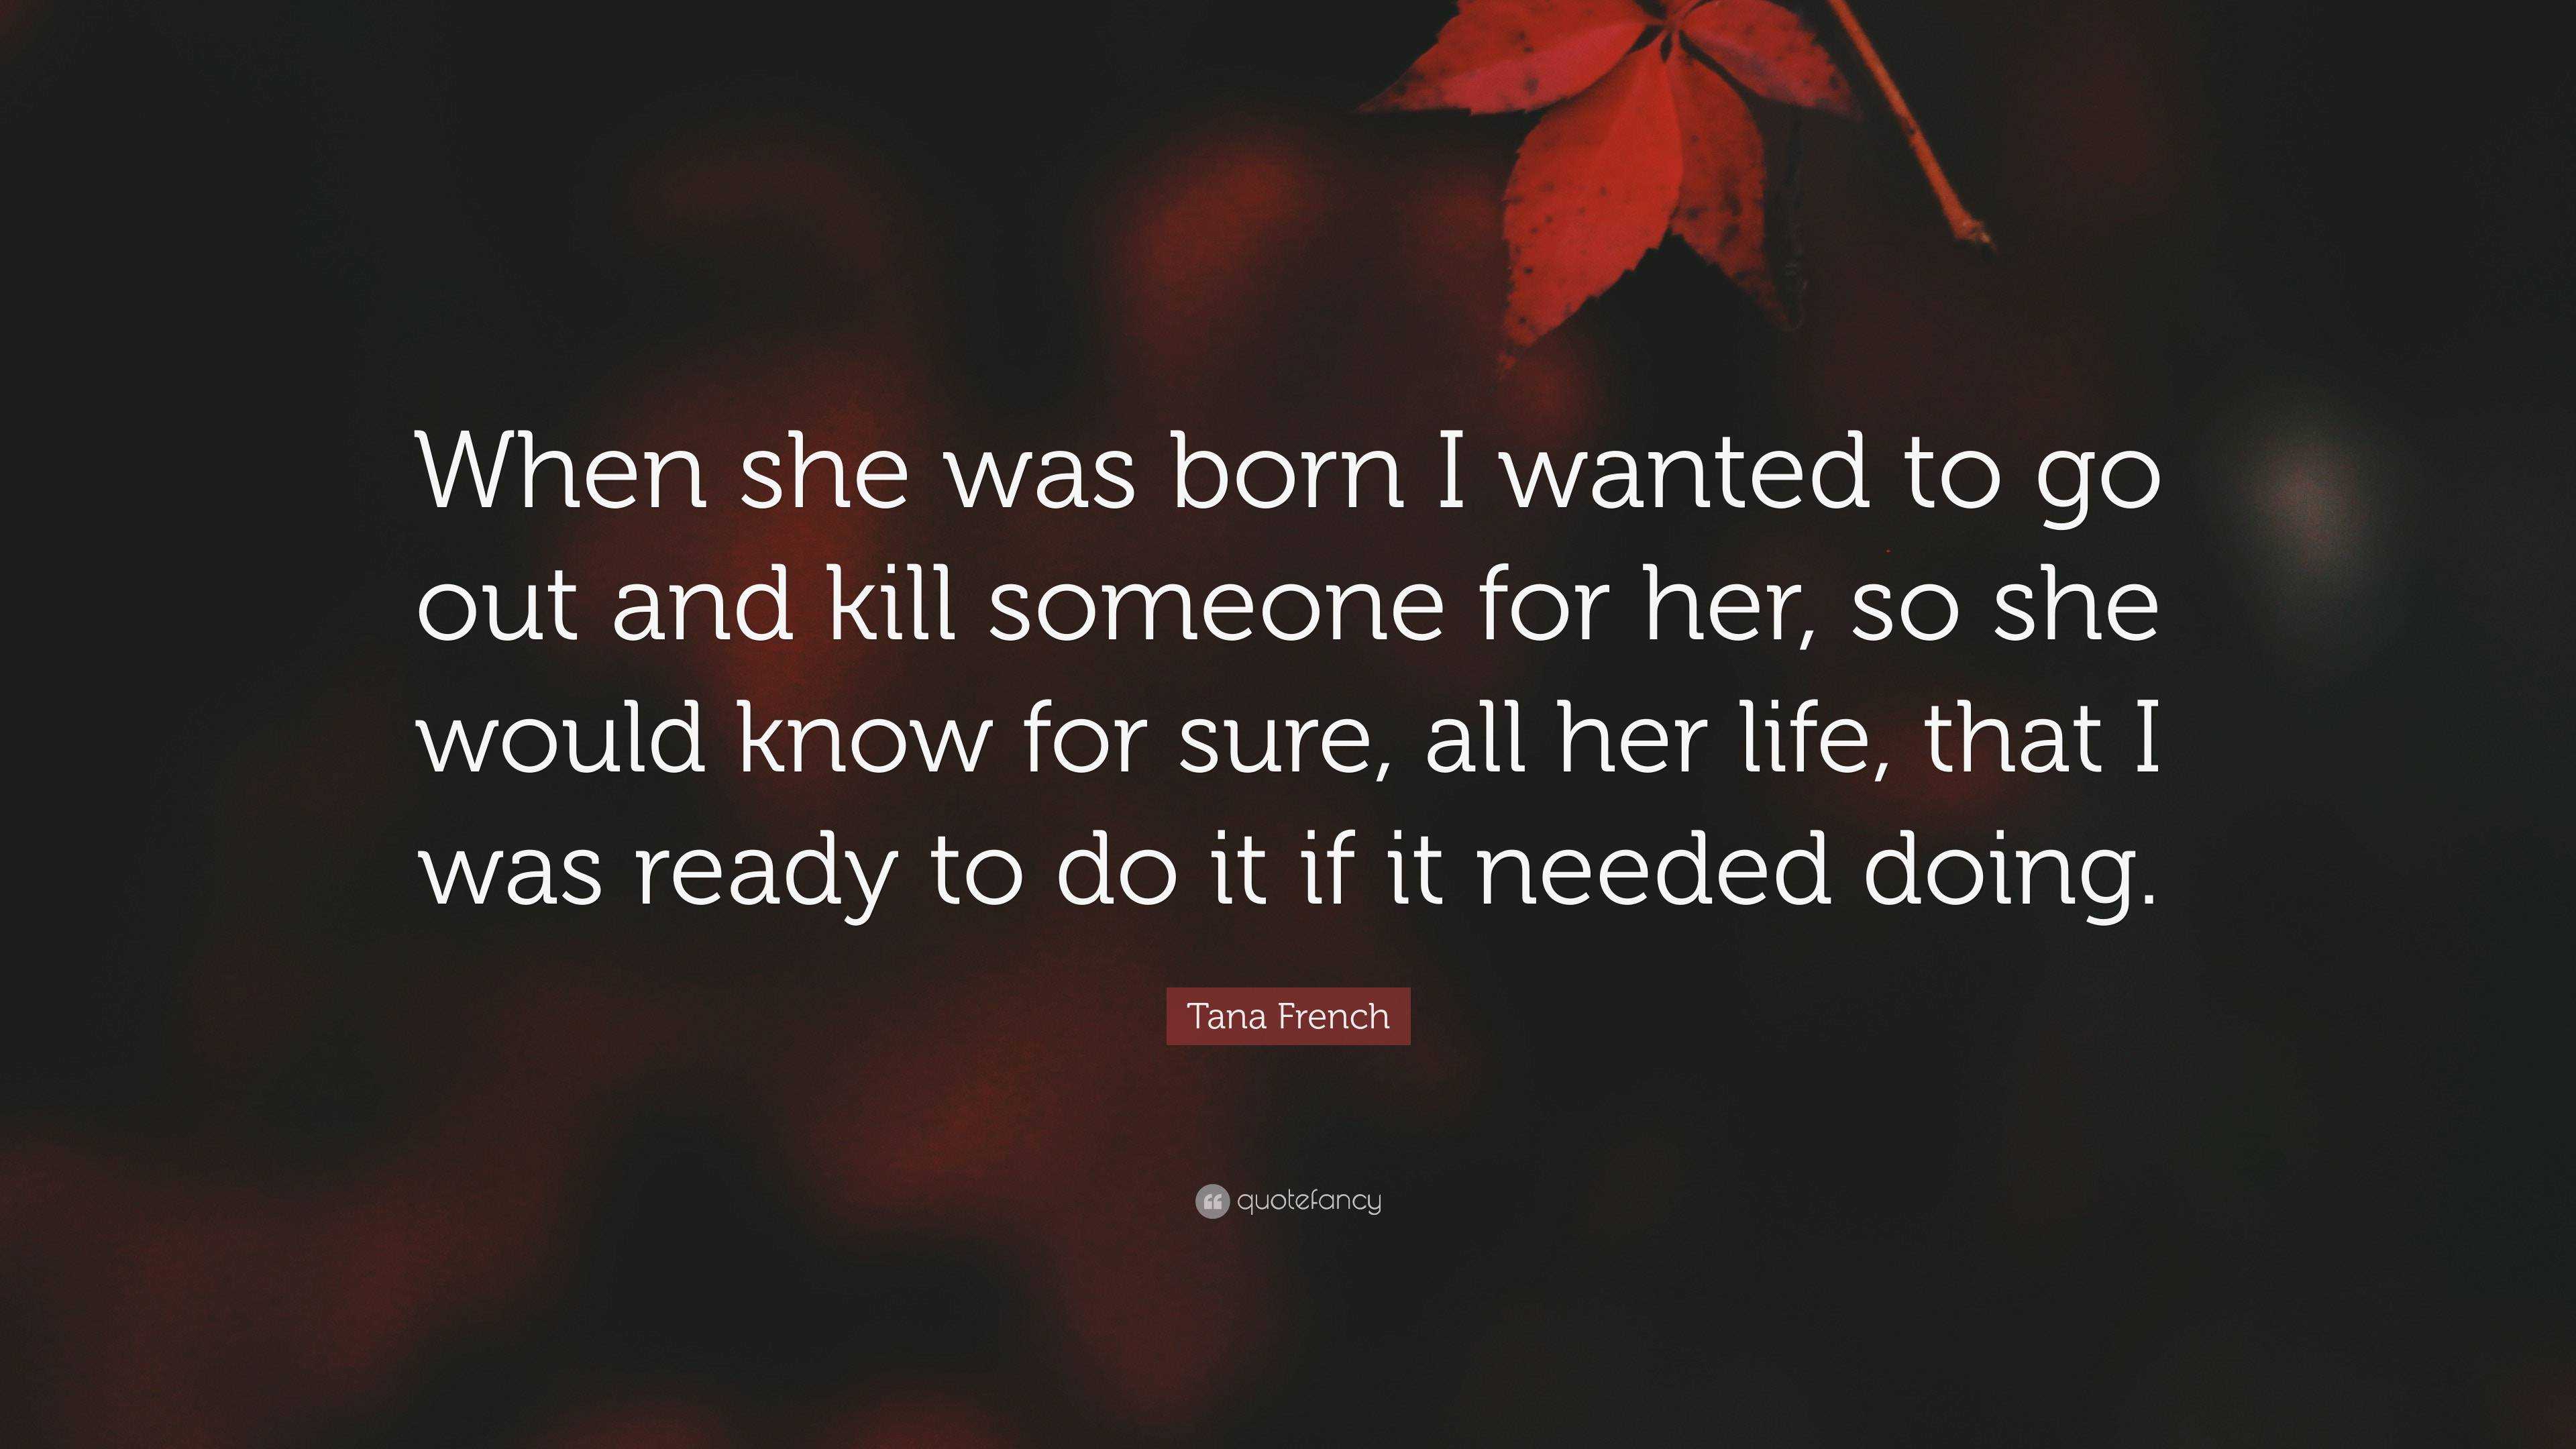 Tana French Quote: “When she was born I wanted to go out and kill ...